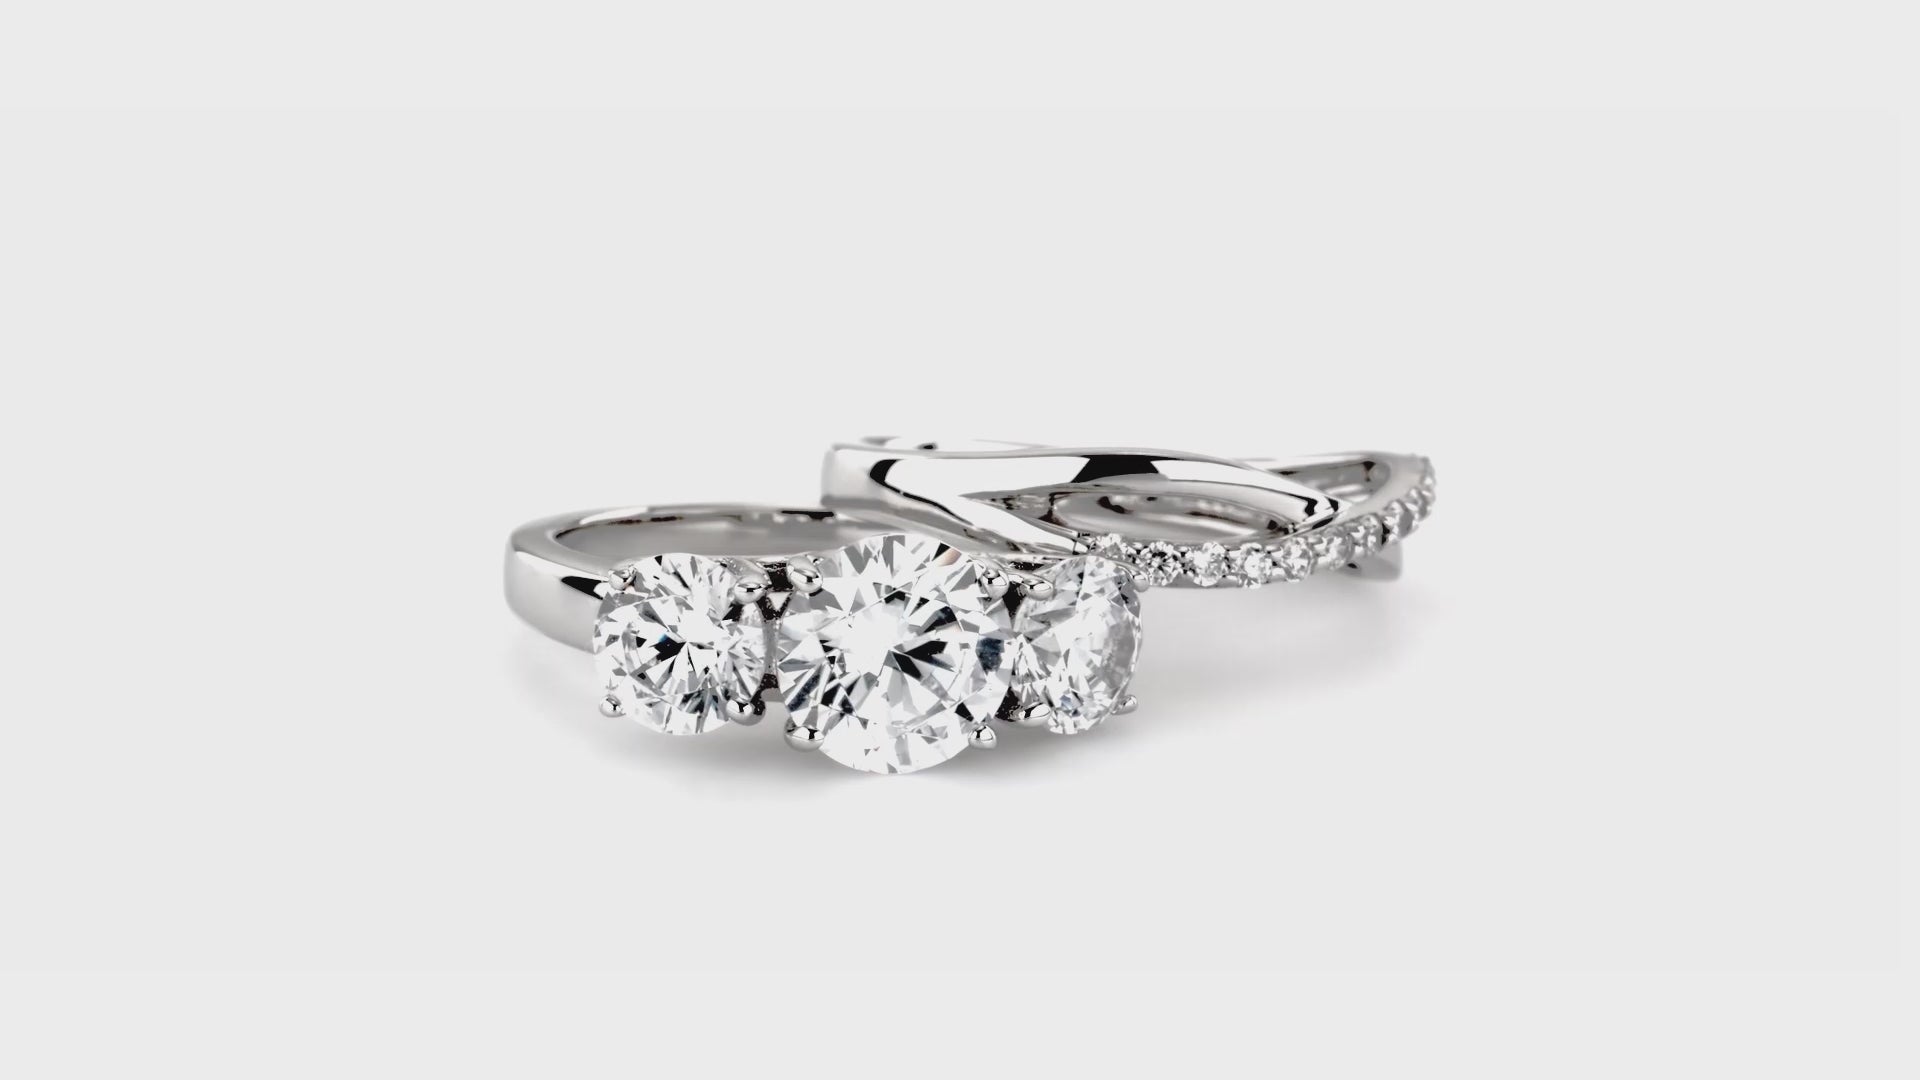 Video Contains 3-Stone Criss Cross Round CZ Ring Set in Sterling Silver. Style Number VR193-01